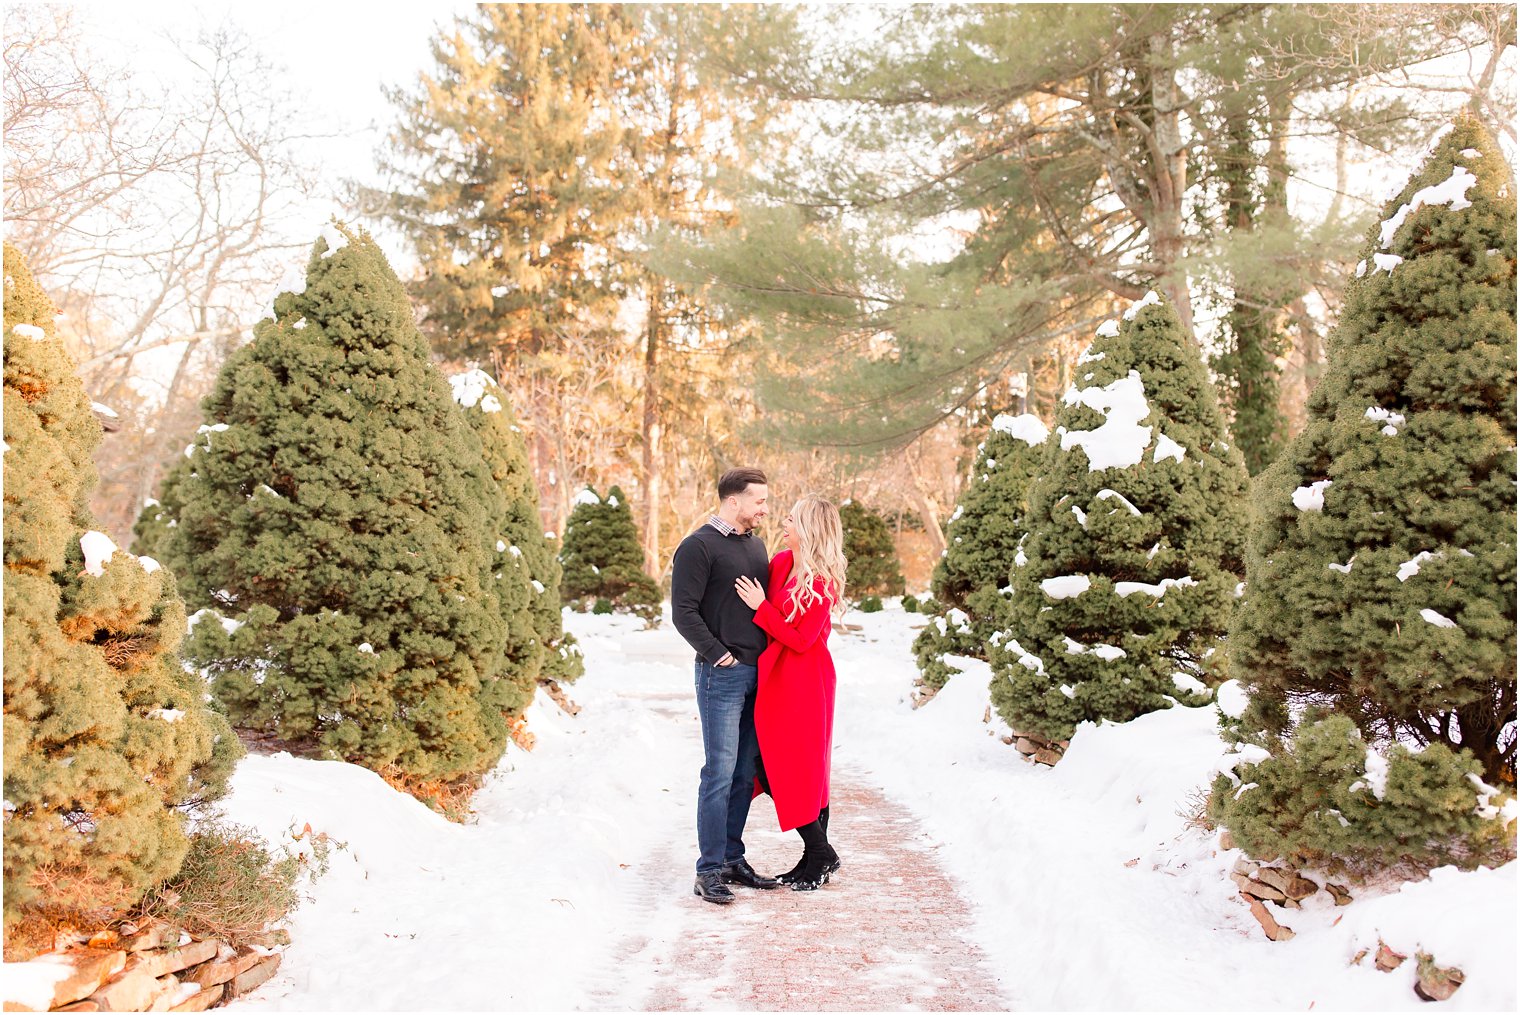 Wintry engagement among the snow and evergreens